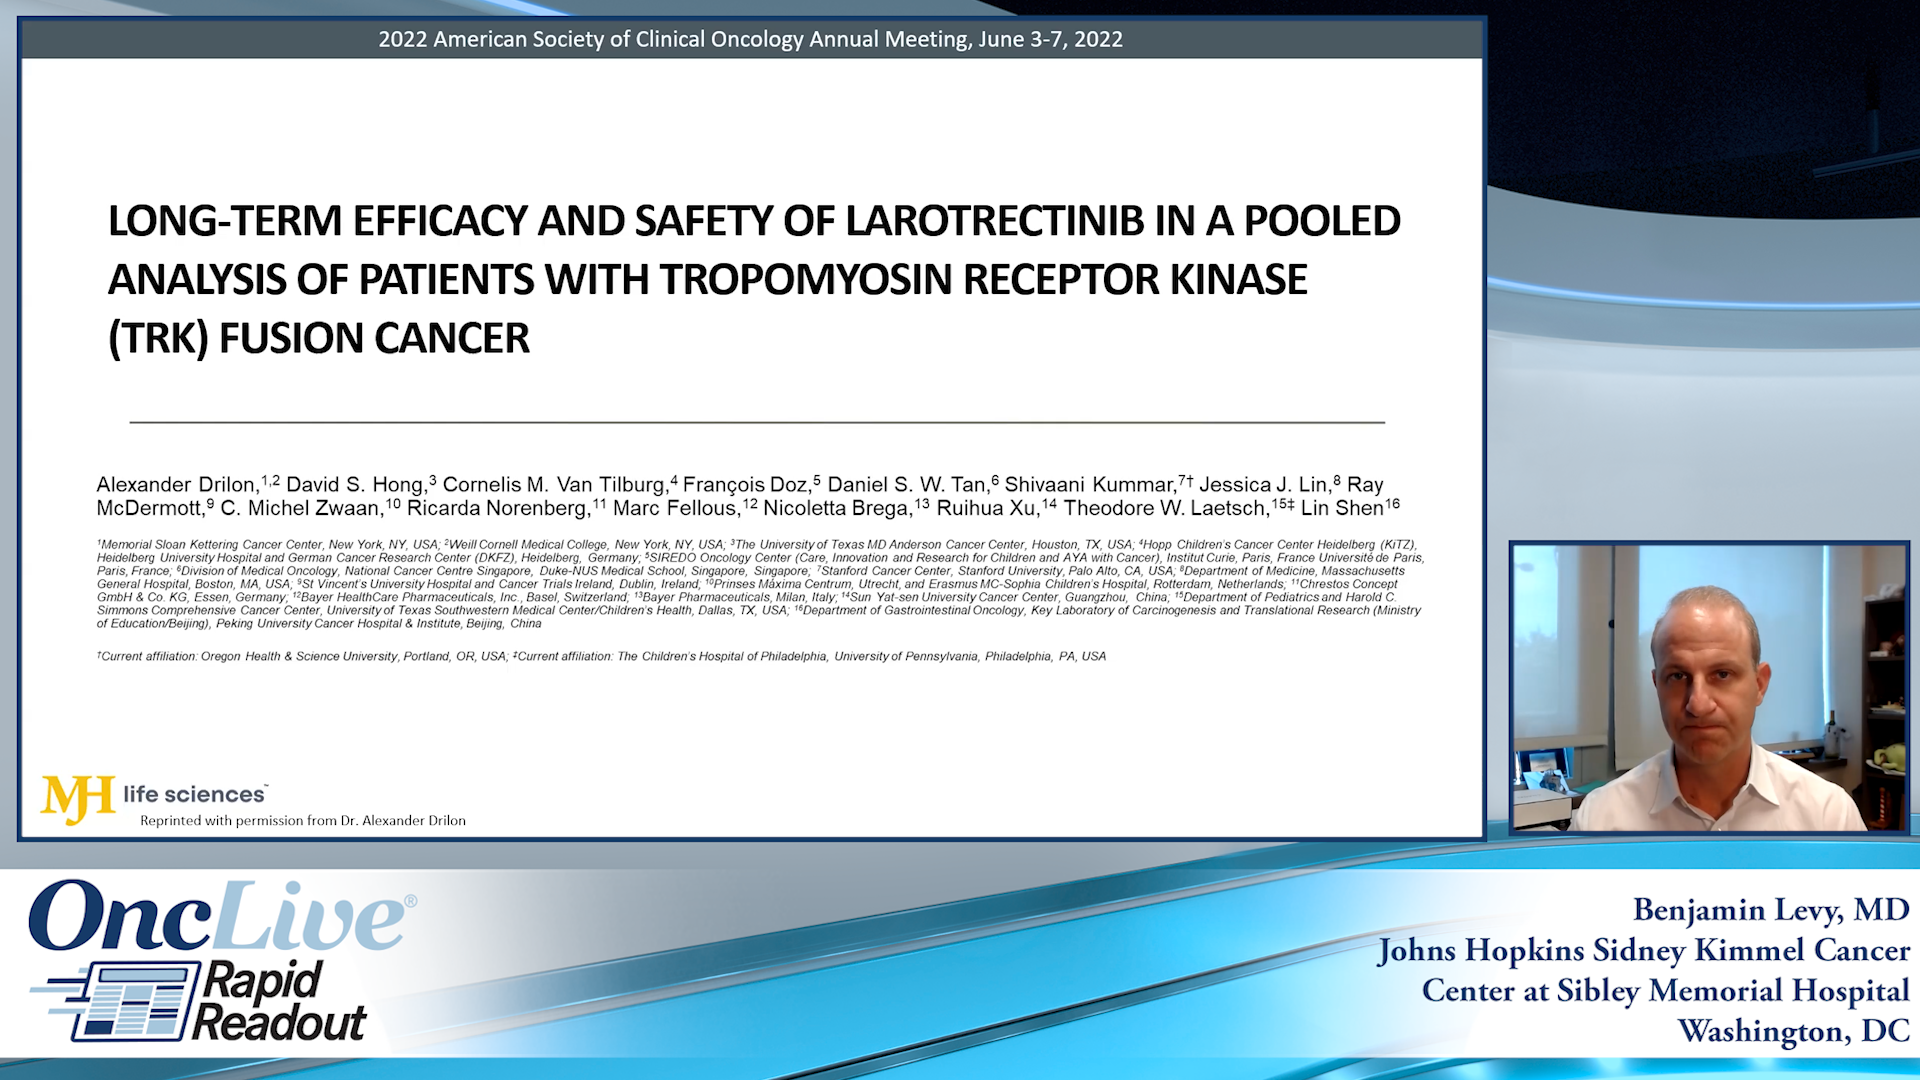 Long-term efficacy and safety of larotrectinib in a pooled analysis of patients with tropomyosin receptor kinase (TRK) fusion cancer